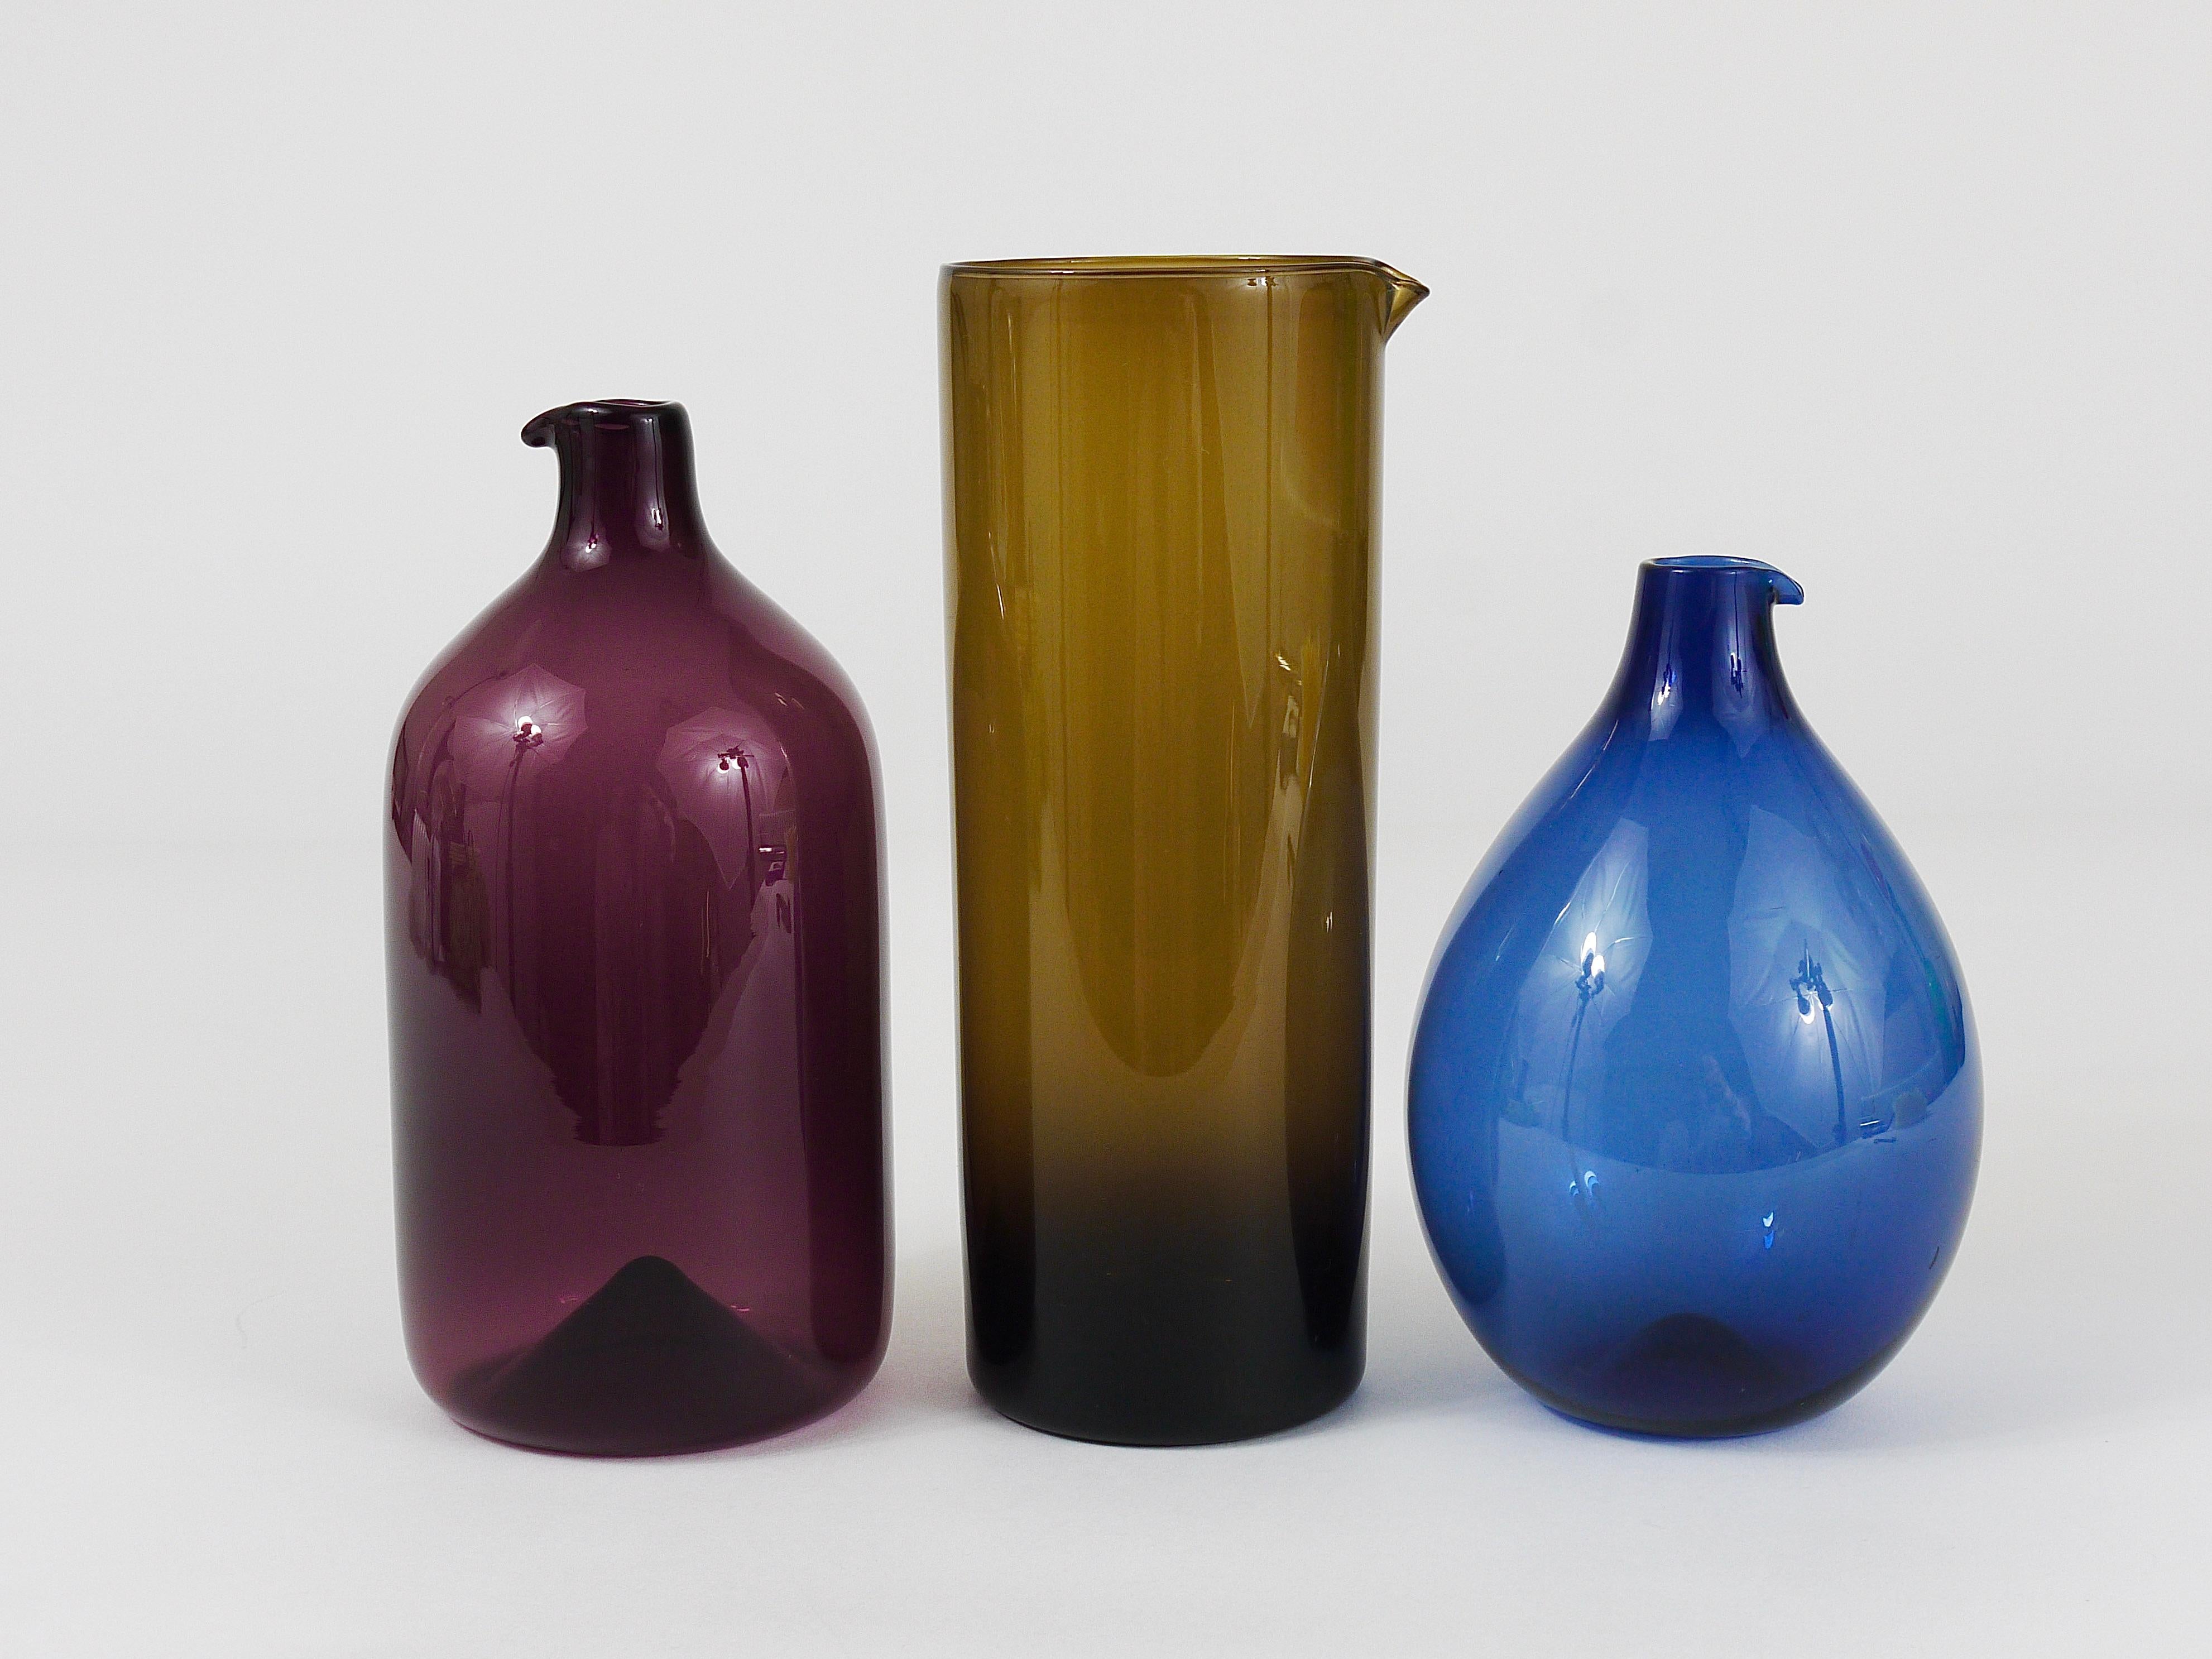 A beautiful art glass bottle vase, model „Pullo“ in violet from the 1950s. Designed by Timo Sarpaneva, executed by Iittala Finland. Fully signed on the bottom. In very good condition.
 